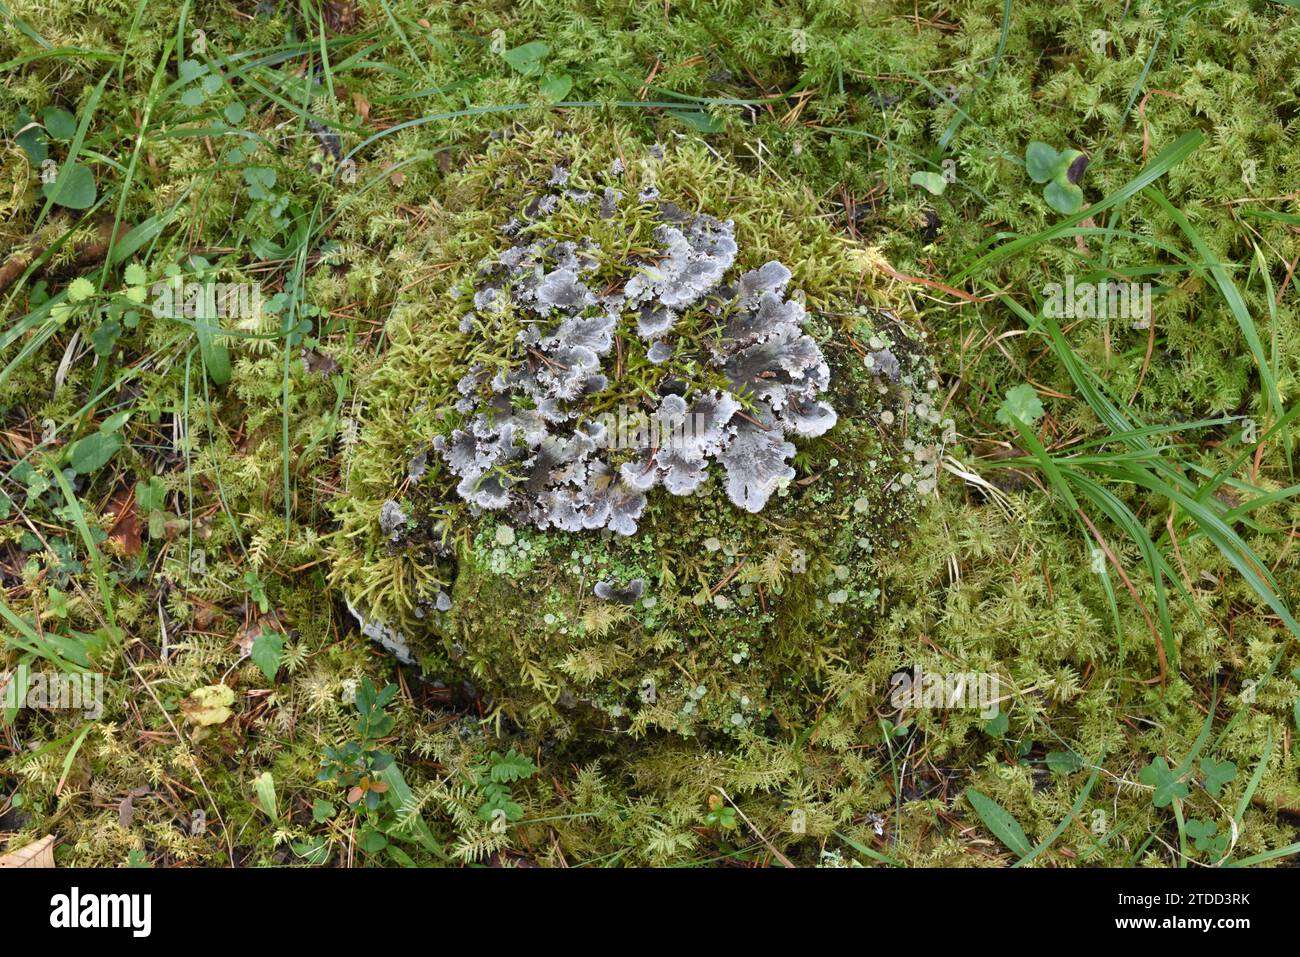 Textured Lungwort, Lobaria scrobiculata, a Foliose Lichen & Trumpet Cup Lichen, Cladonia fimbriata, Growing on a Stone on Moss-Covered Forest Floor Stock Photo